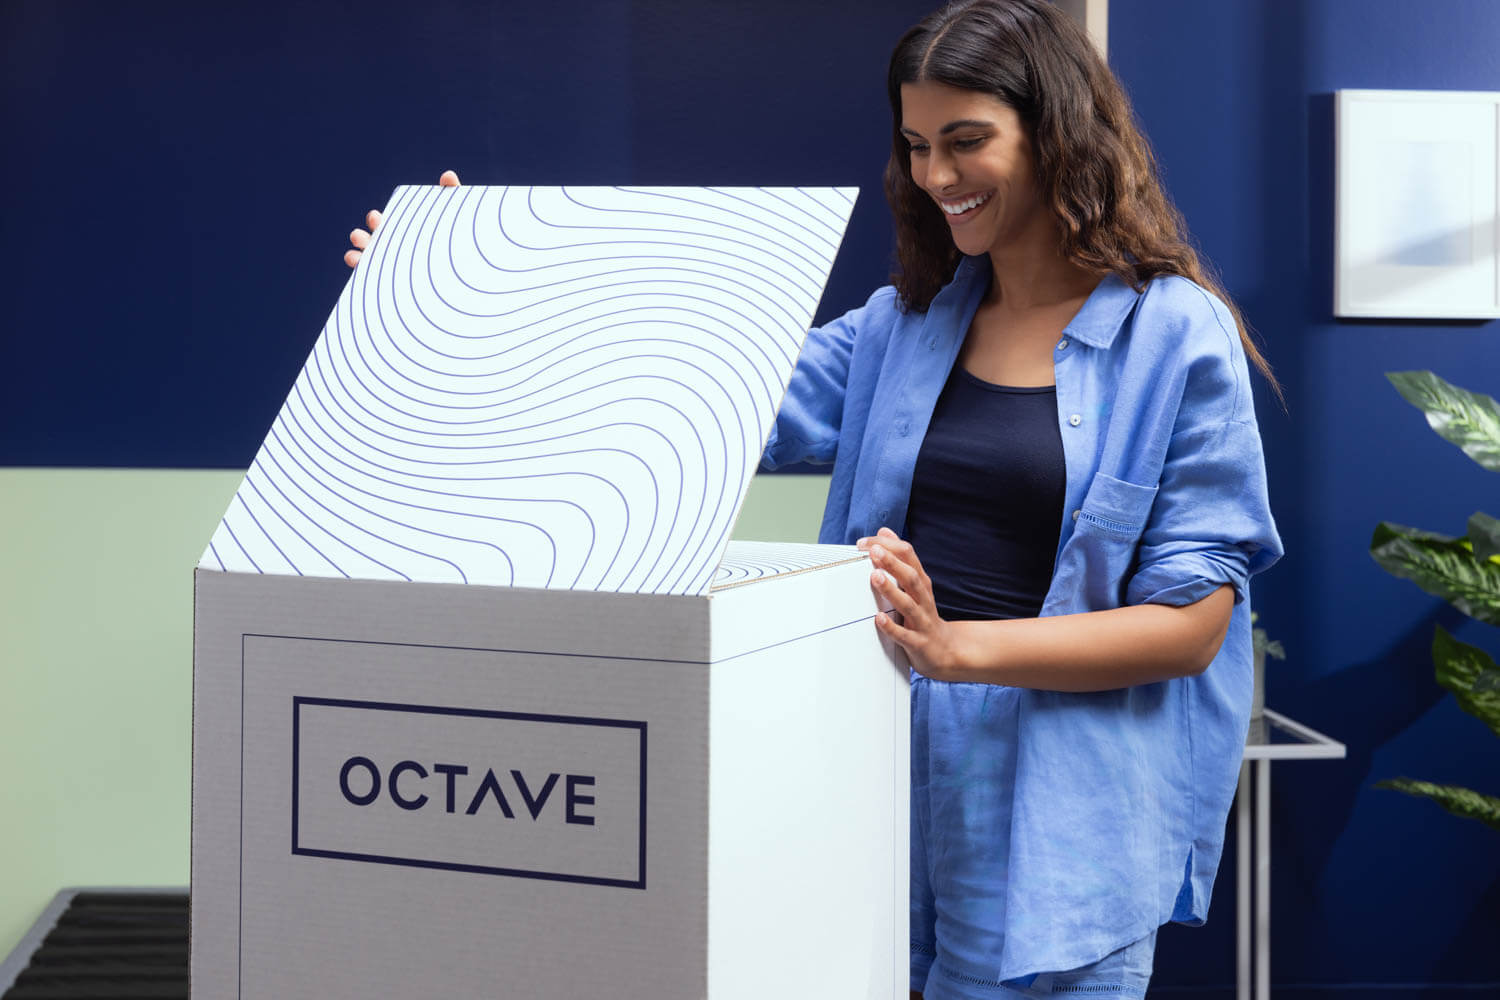 Woman smiling and unboxing Octave mattress